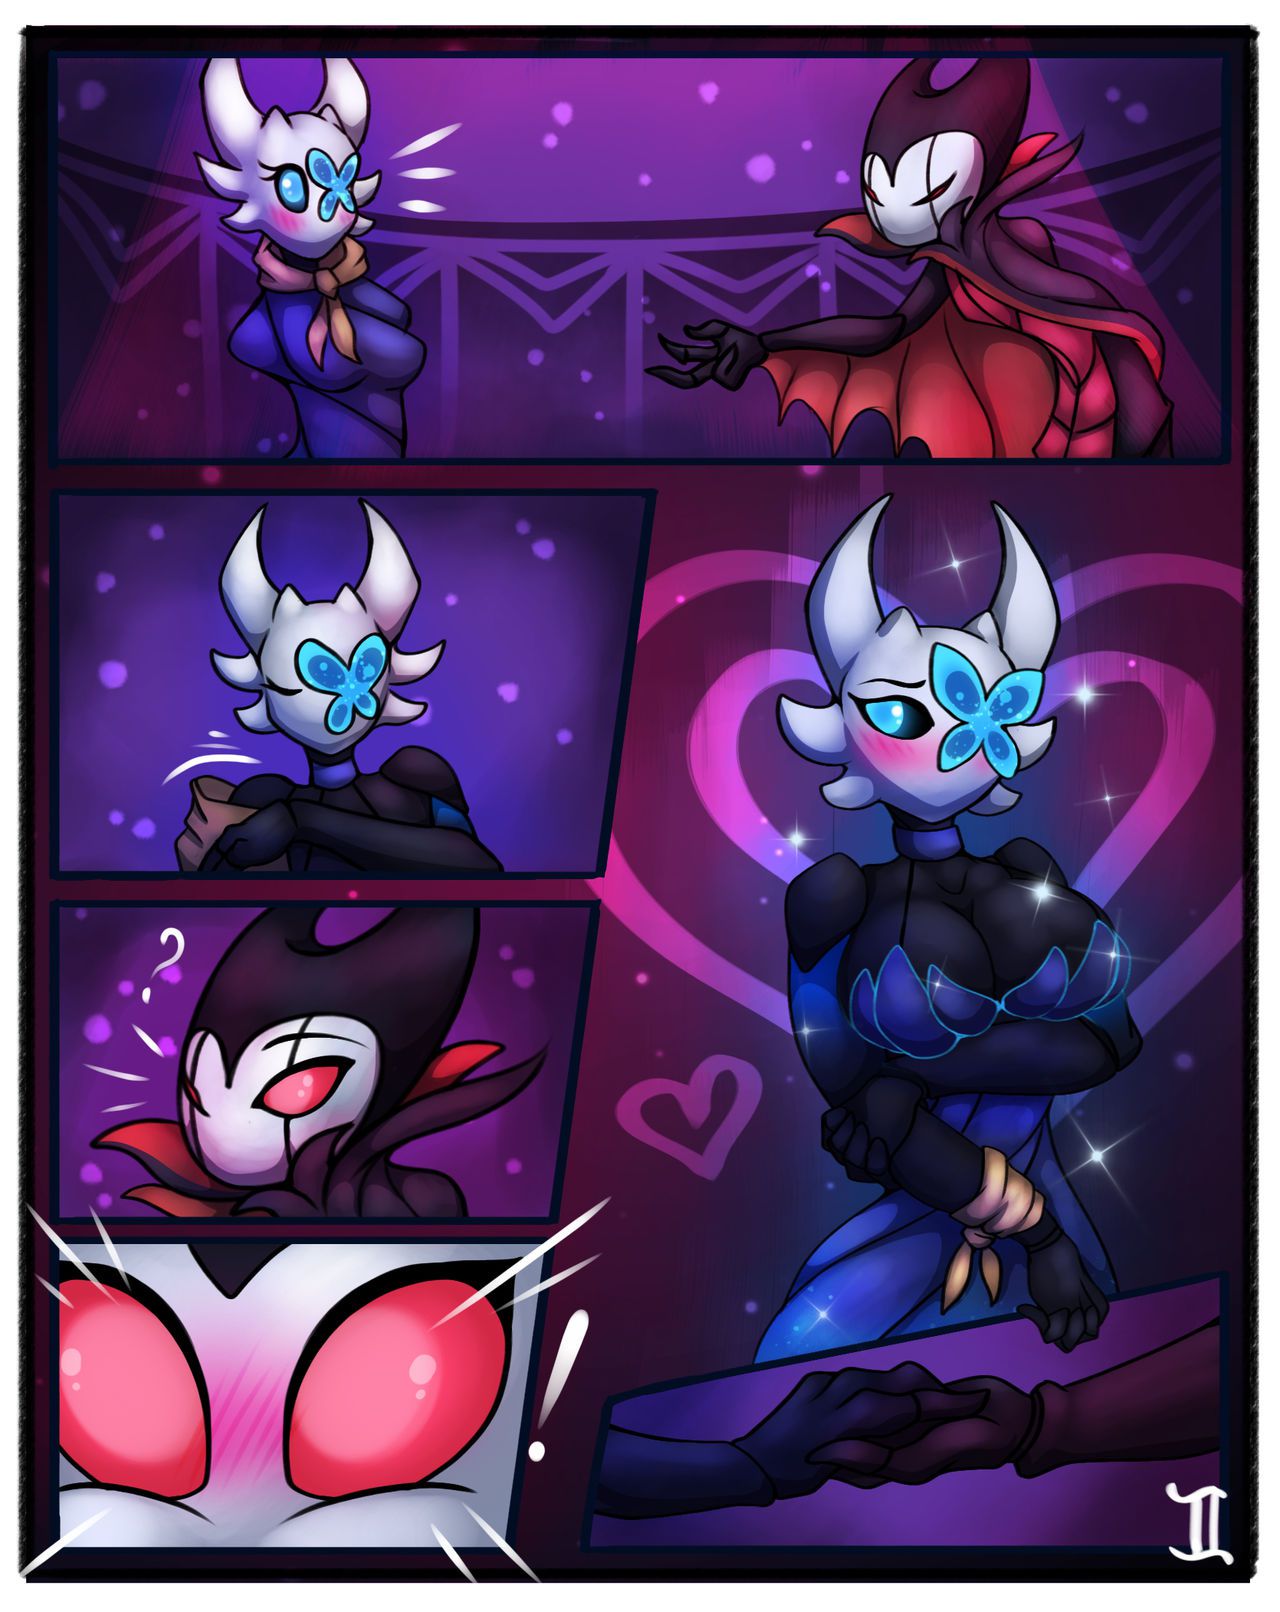 [AzuraInalis] Dance With Me (Ongoing) 3